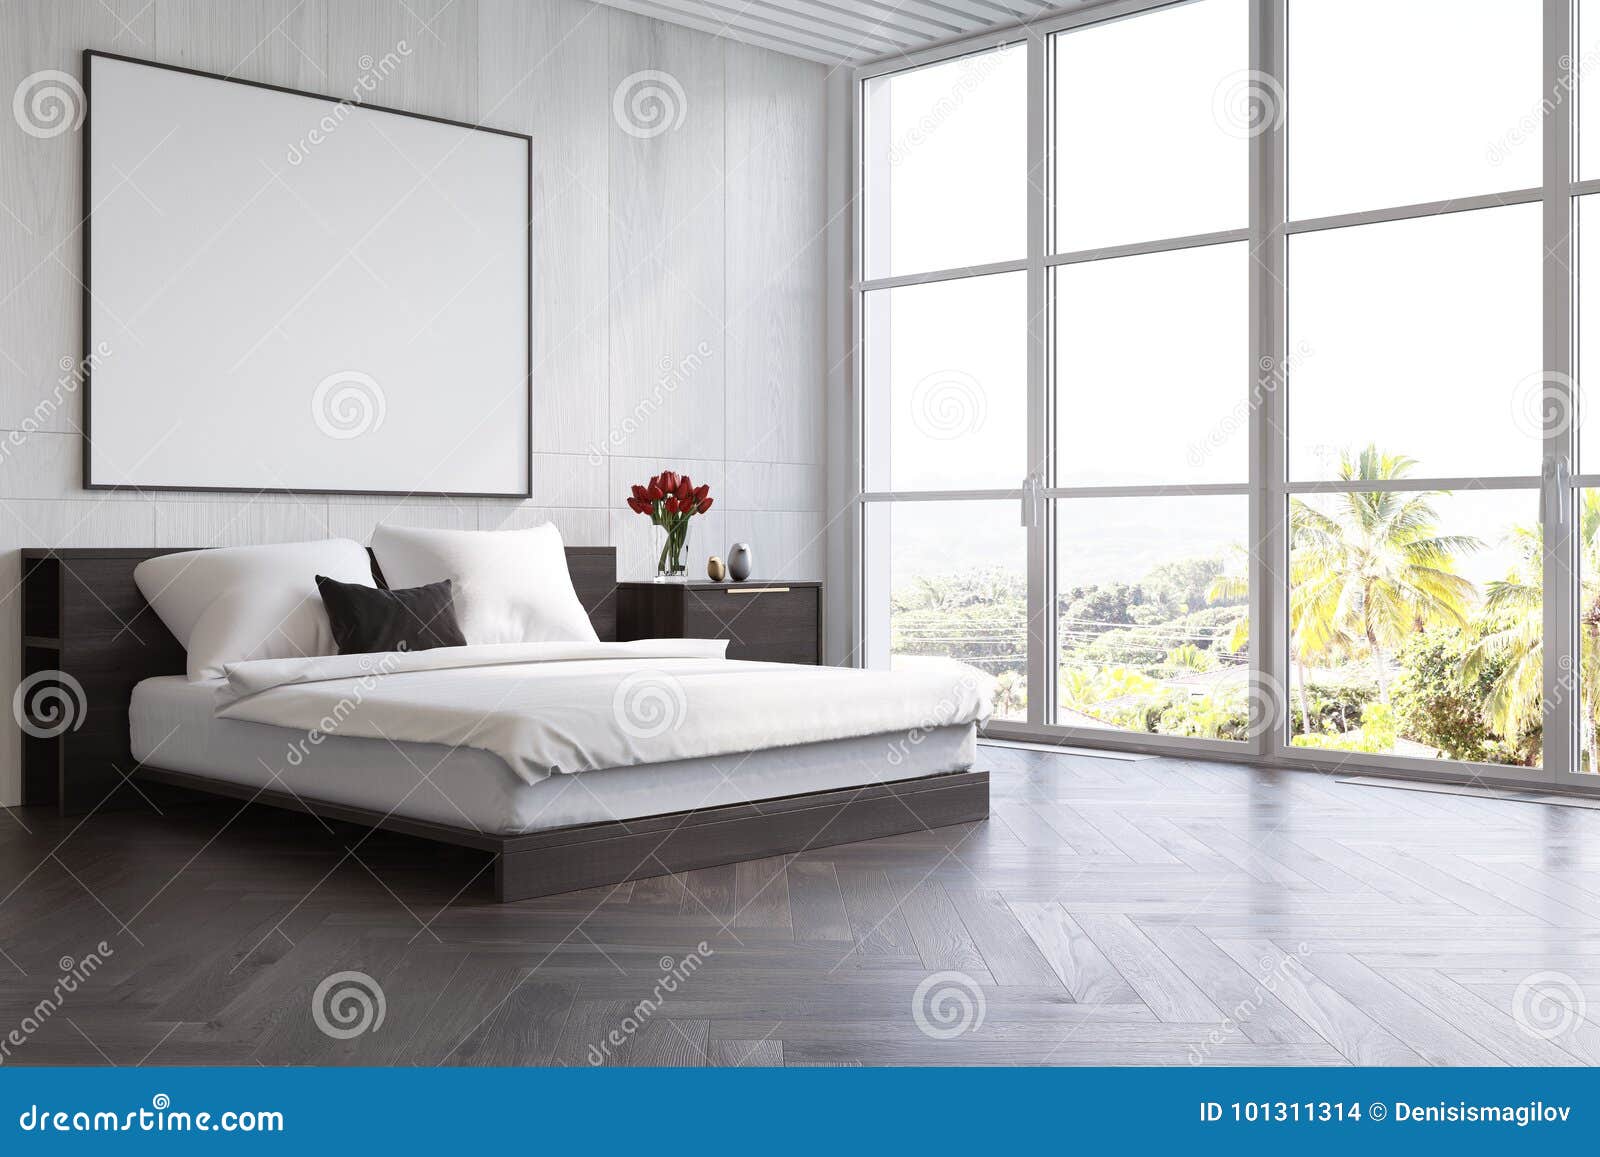 White Wooden Bedroom With A Poster Side Stock Illustration